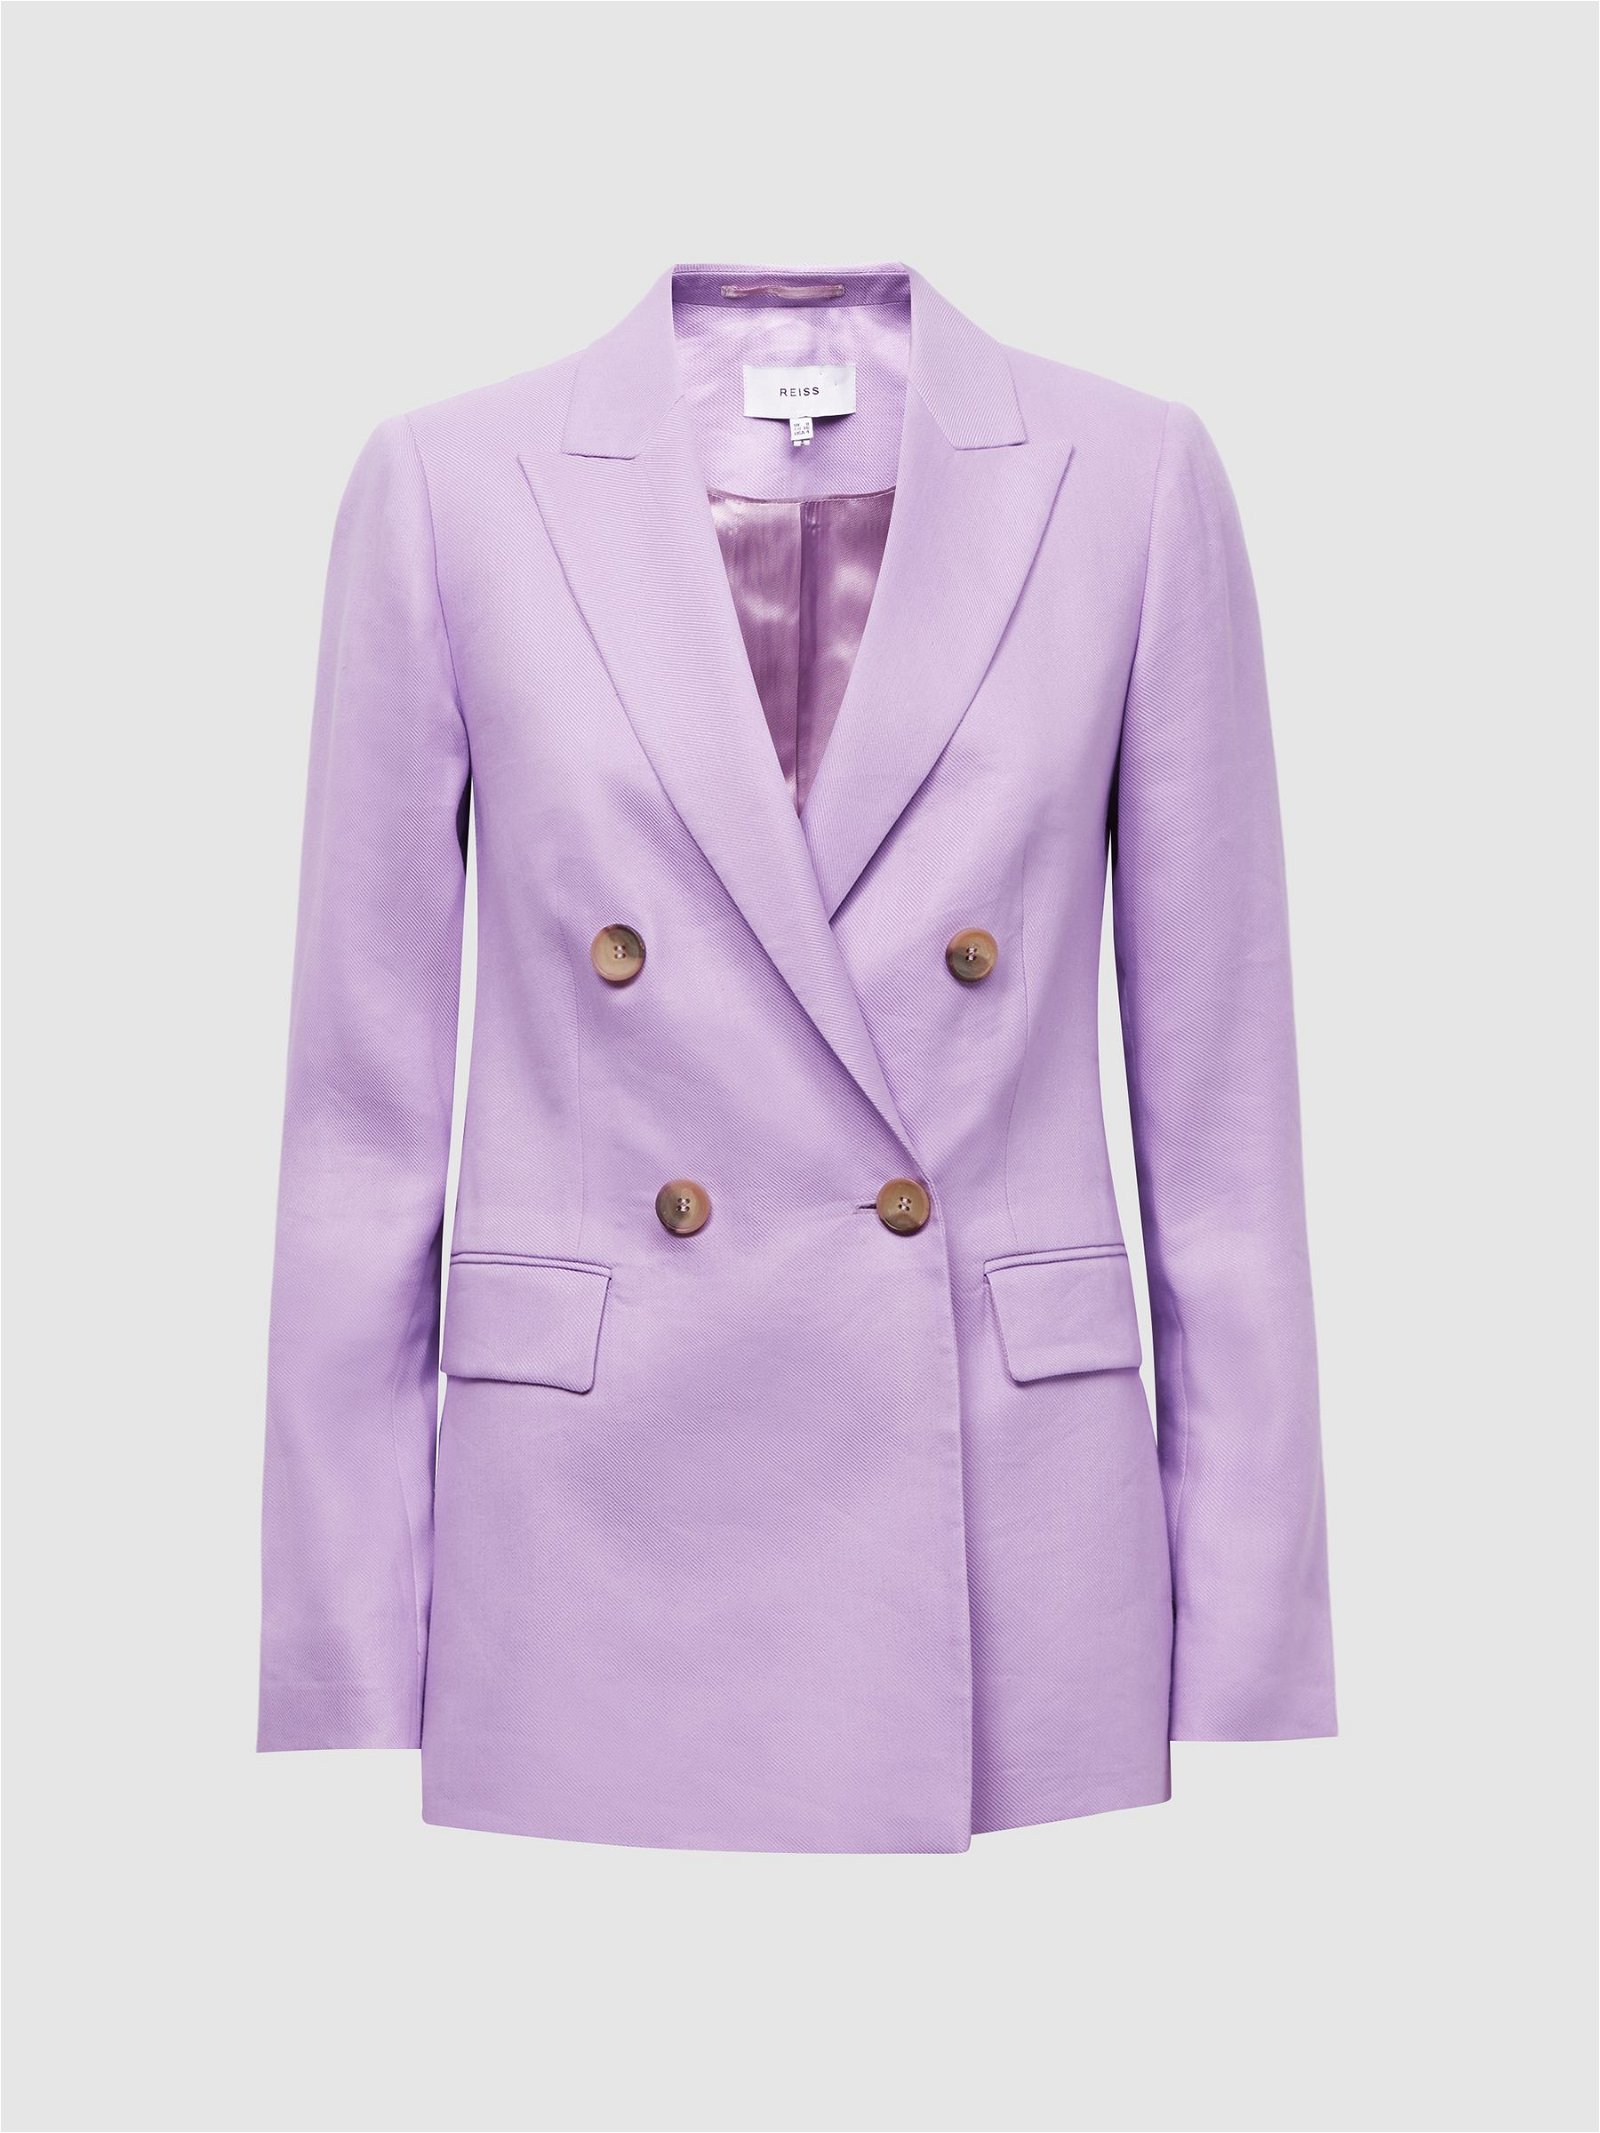 REISS Hollie Double Breasted Blazer in Lilac | Endource